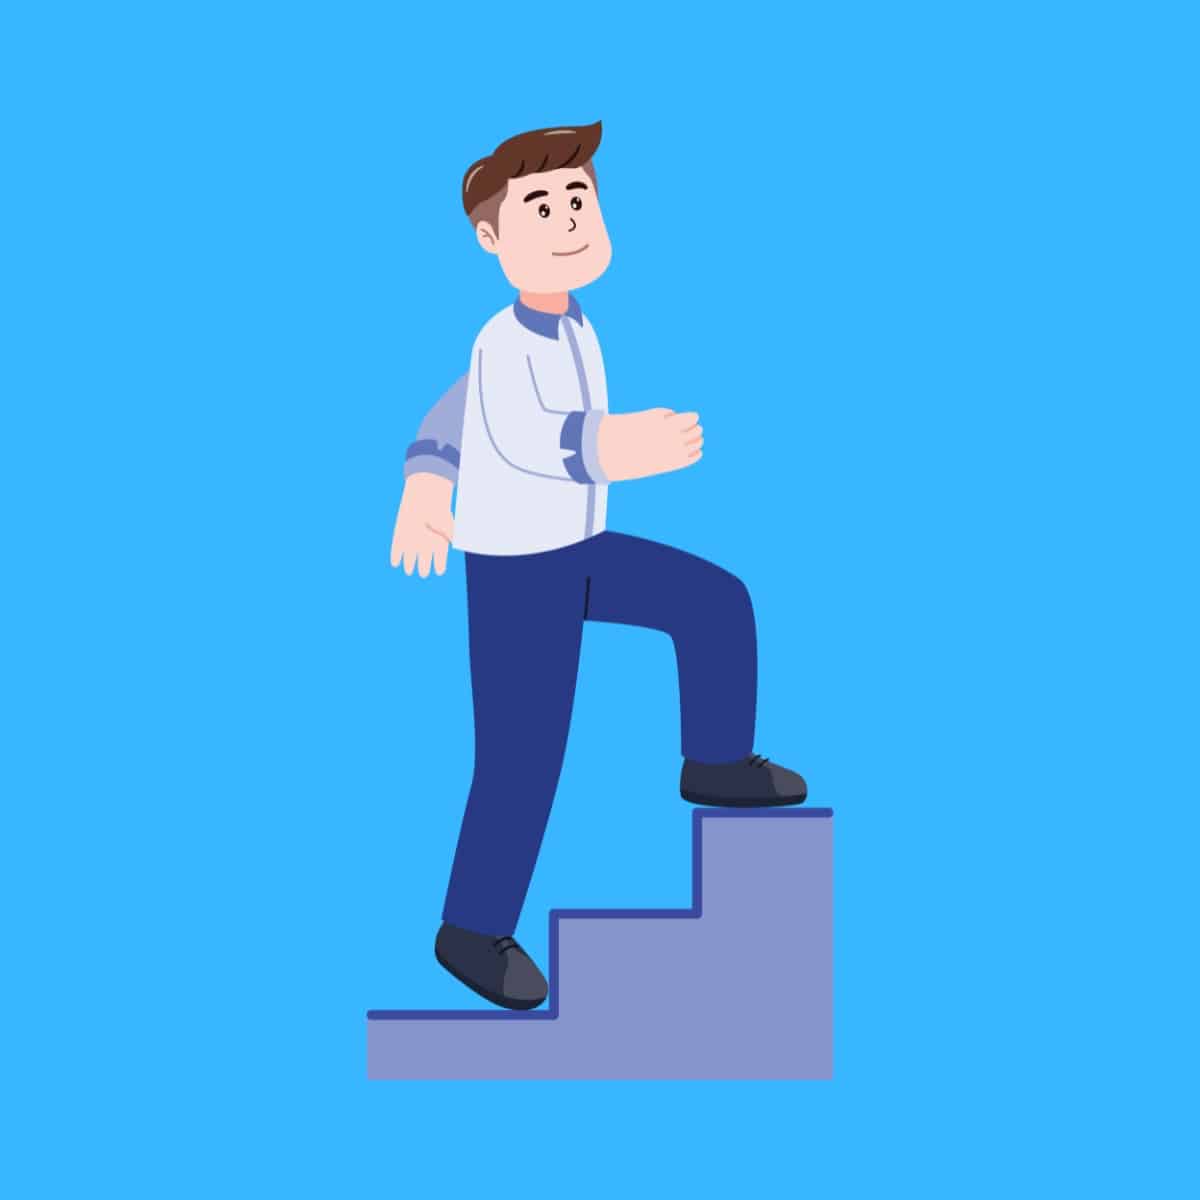 Cartoon graphic of a man walking up stairs on a blue background.